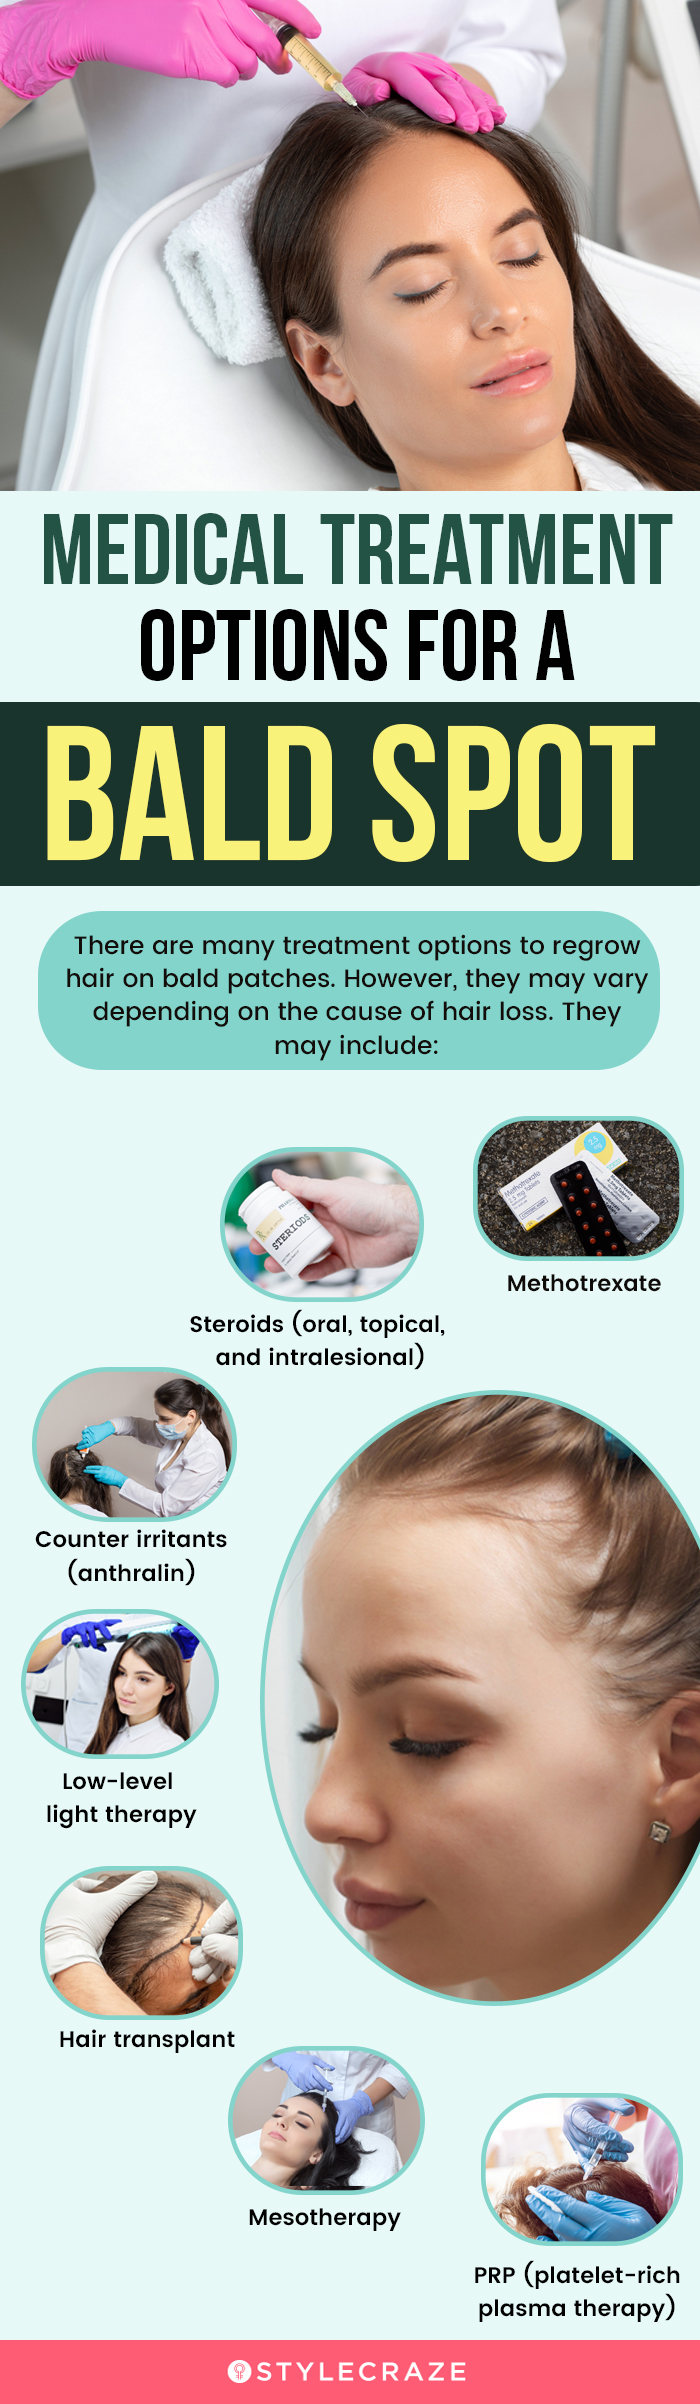 medial treatment options for a blad spot (infographic)